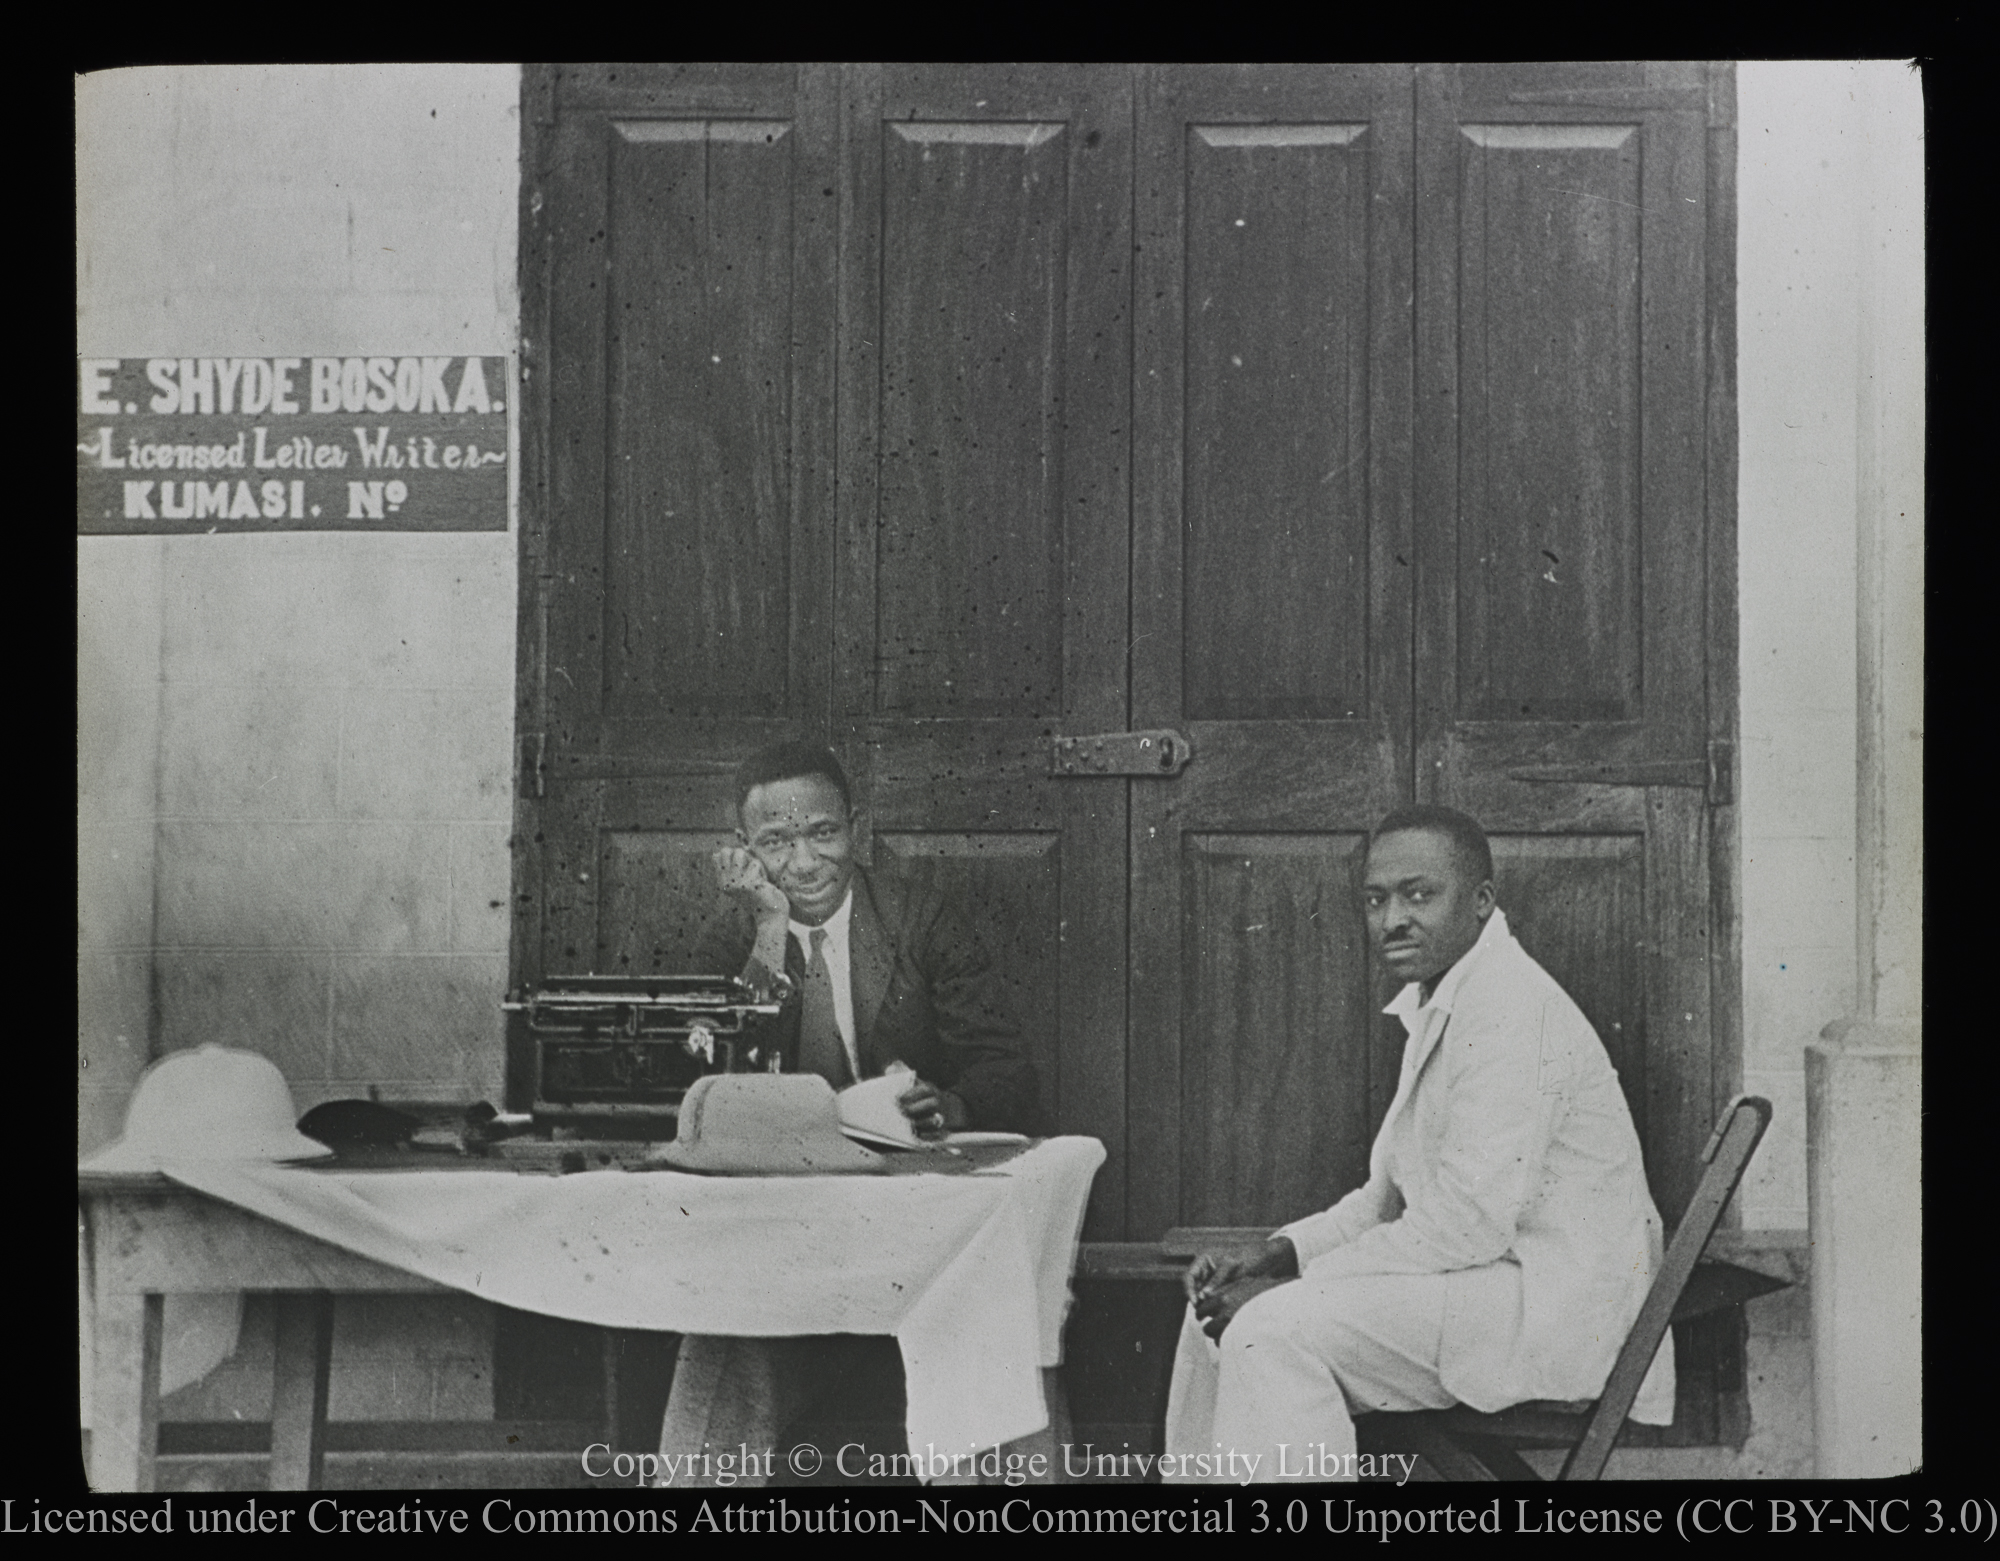 Licensed letter writer and client, Kumasi, Gold Coast [Ghana], 1900 - 1947